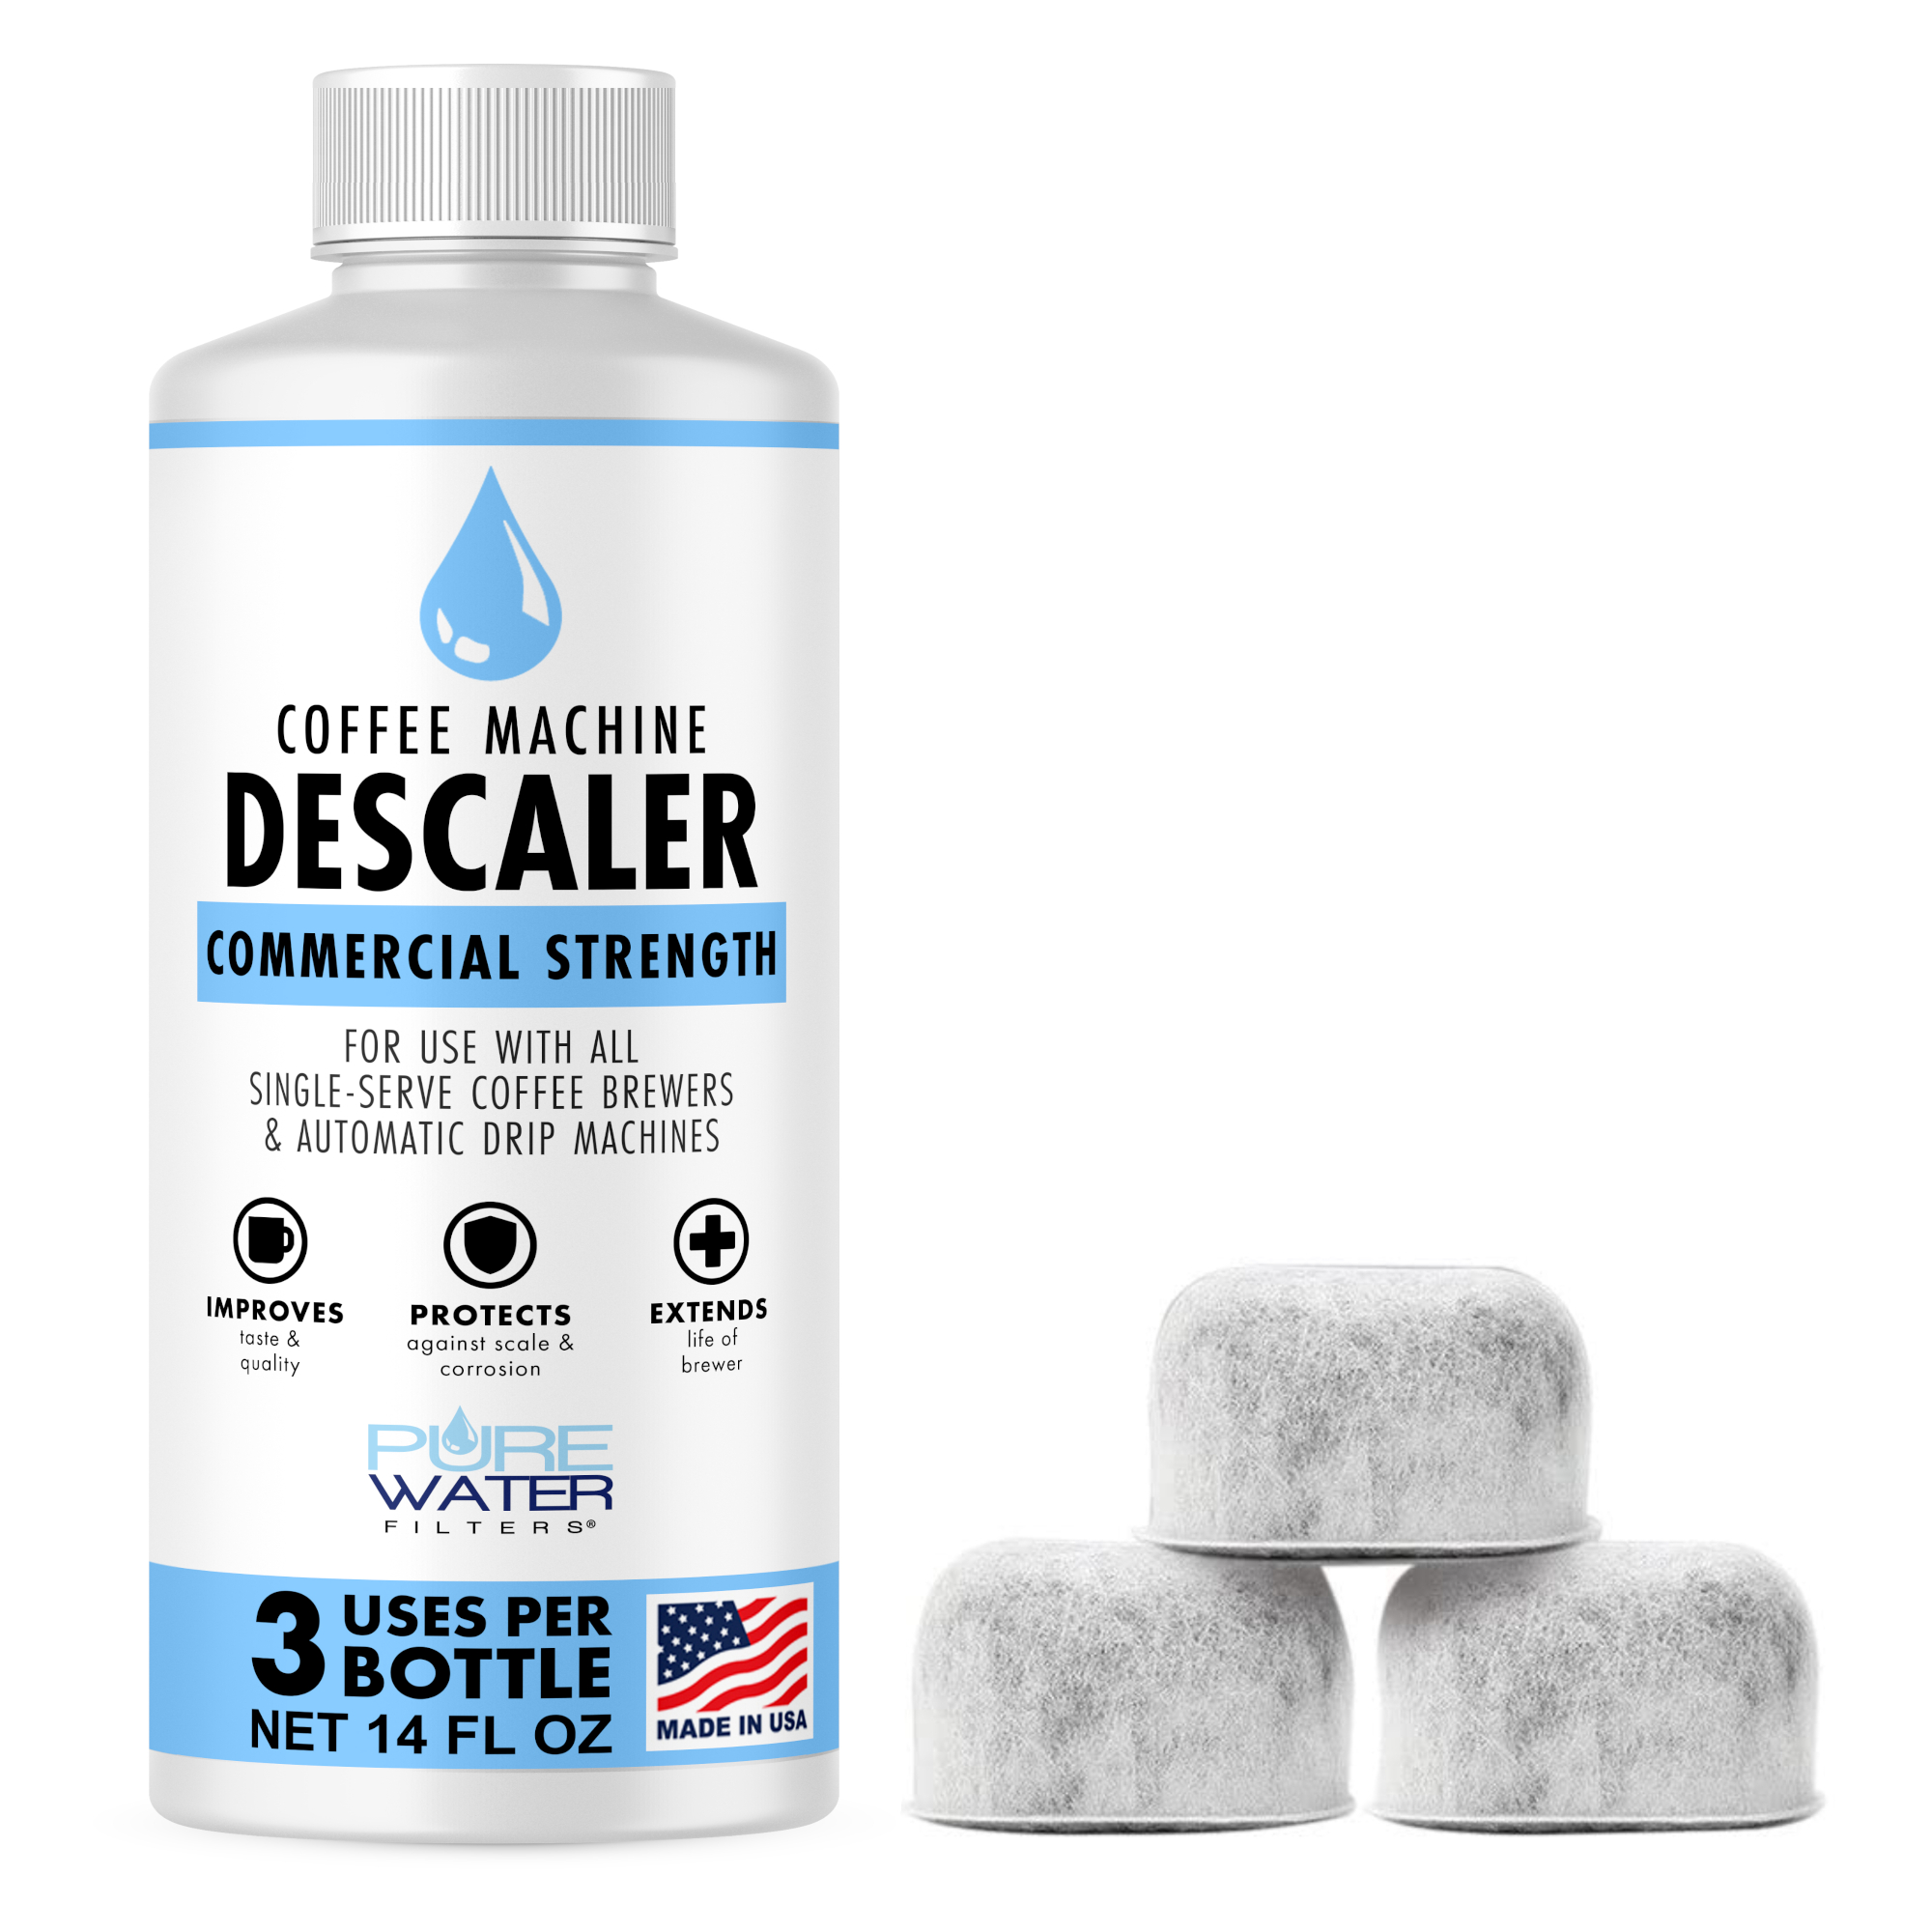 Keurig Descaler 3 Pack, Universal Descaling Solution for Keurig, Delonghi, Nespresso and All Single Use Coffee Pot Machines